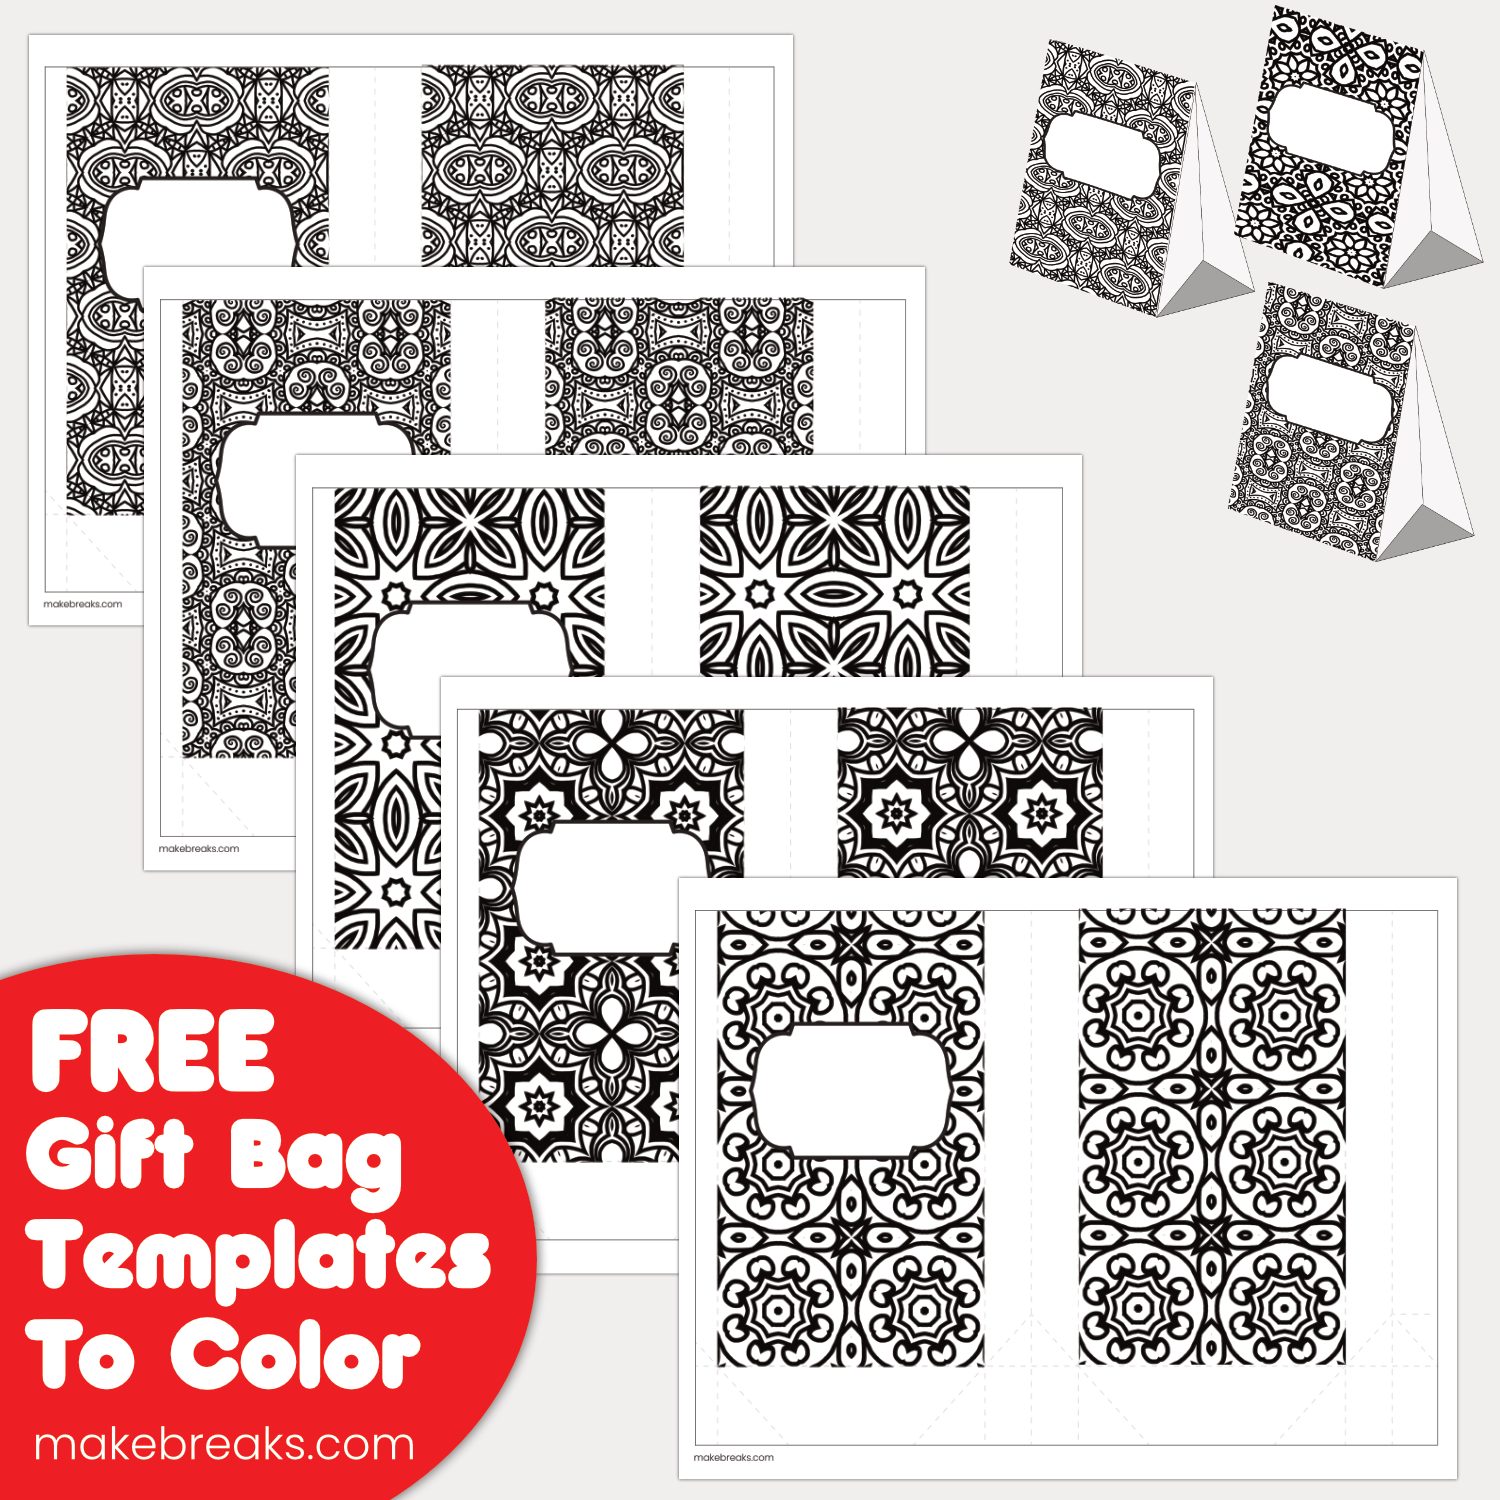 Free Gift Bag Templates to Color